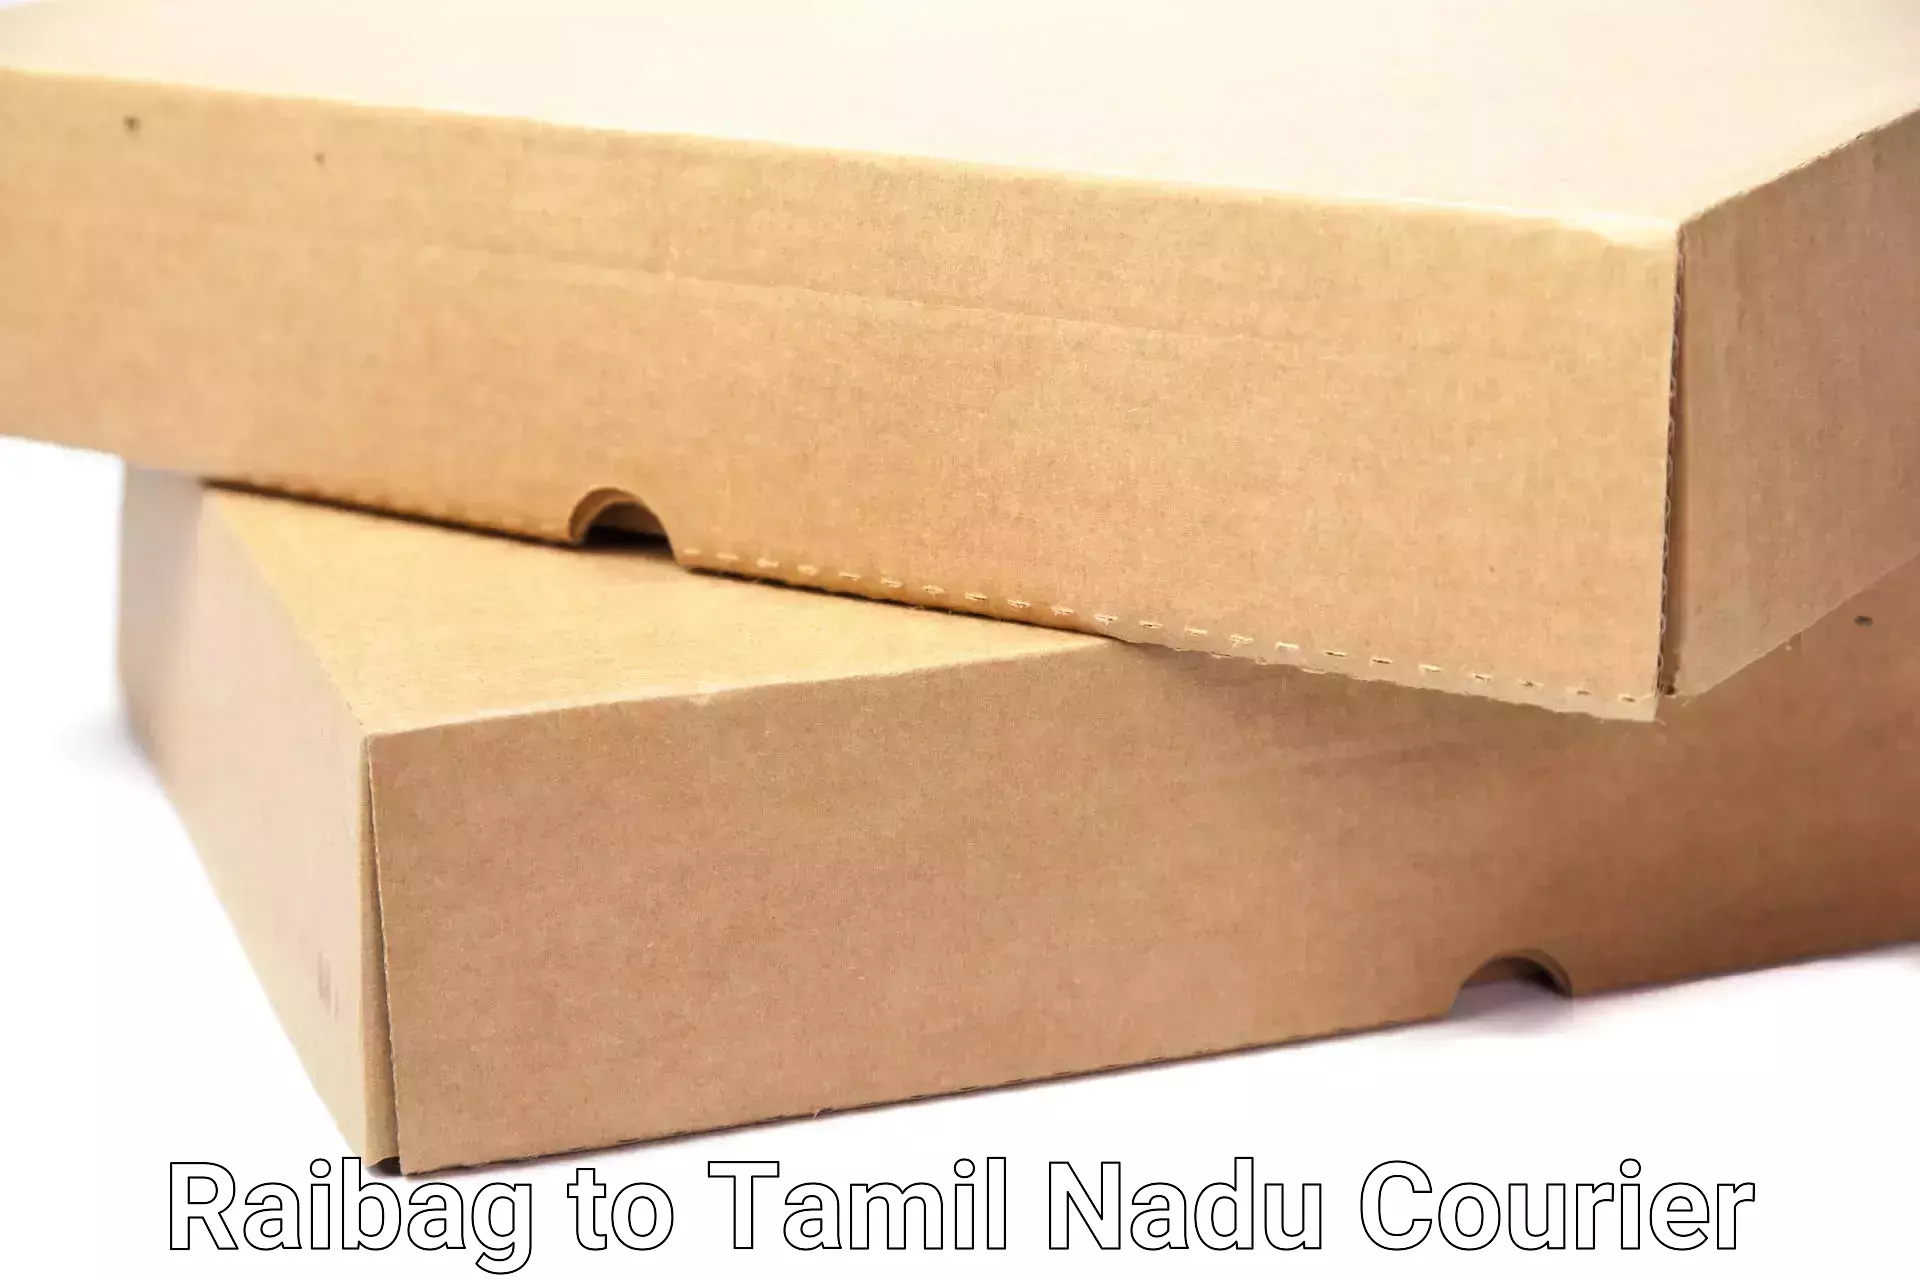 Full-service movers in Raibag to Natham